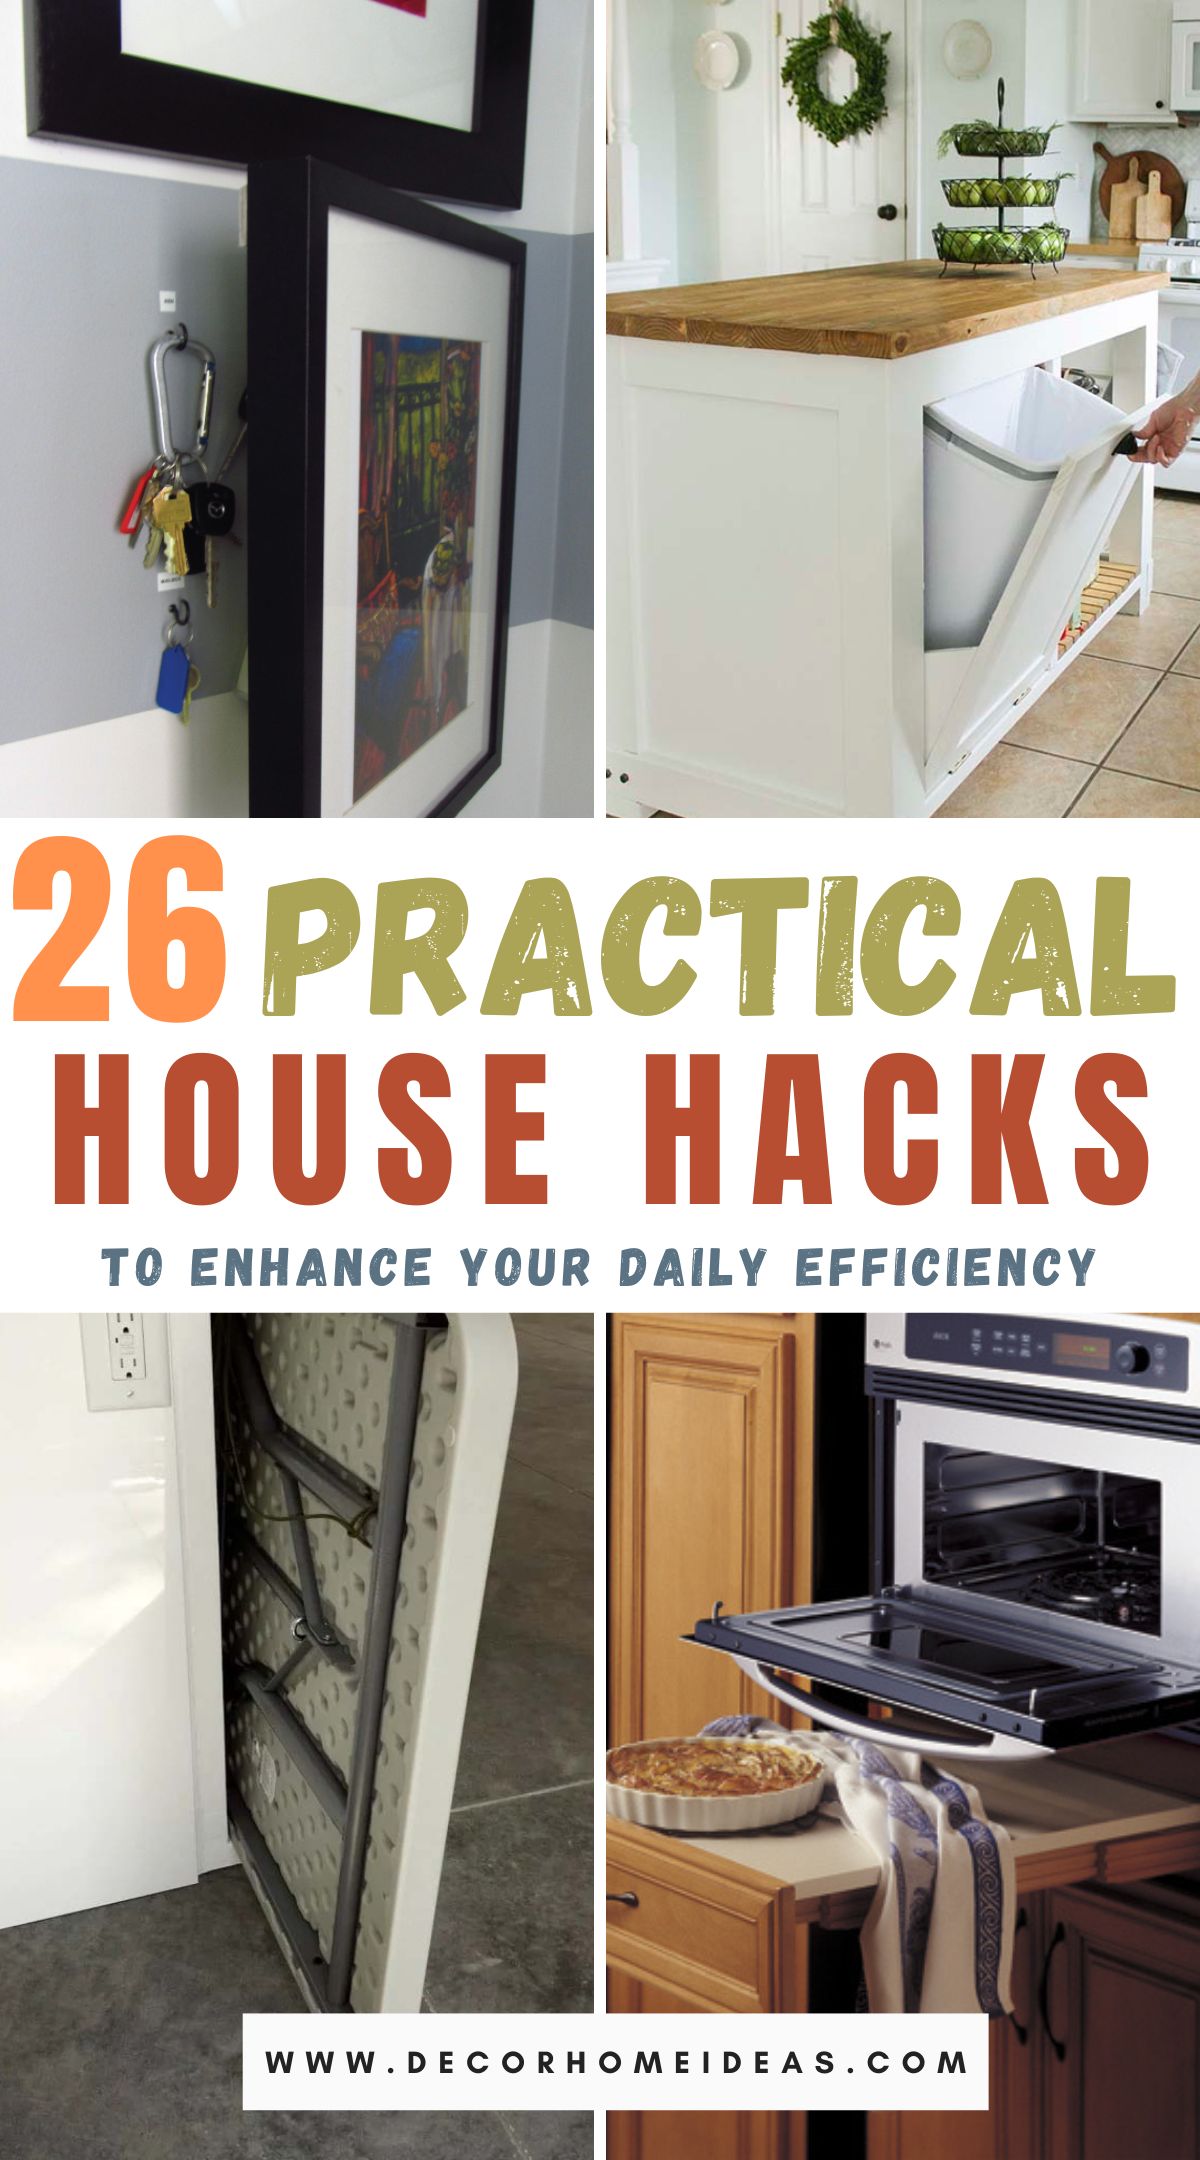 Simplify and optimize your home with these 26 ingenious house hacks. From clever storage solutions to time-saving organization tips, discover innovative ways to make your living space more efficient and enjoyable.